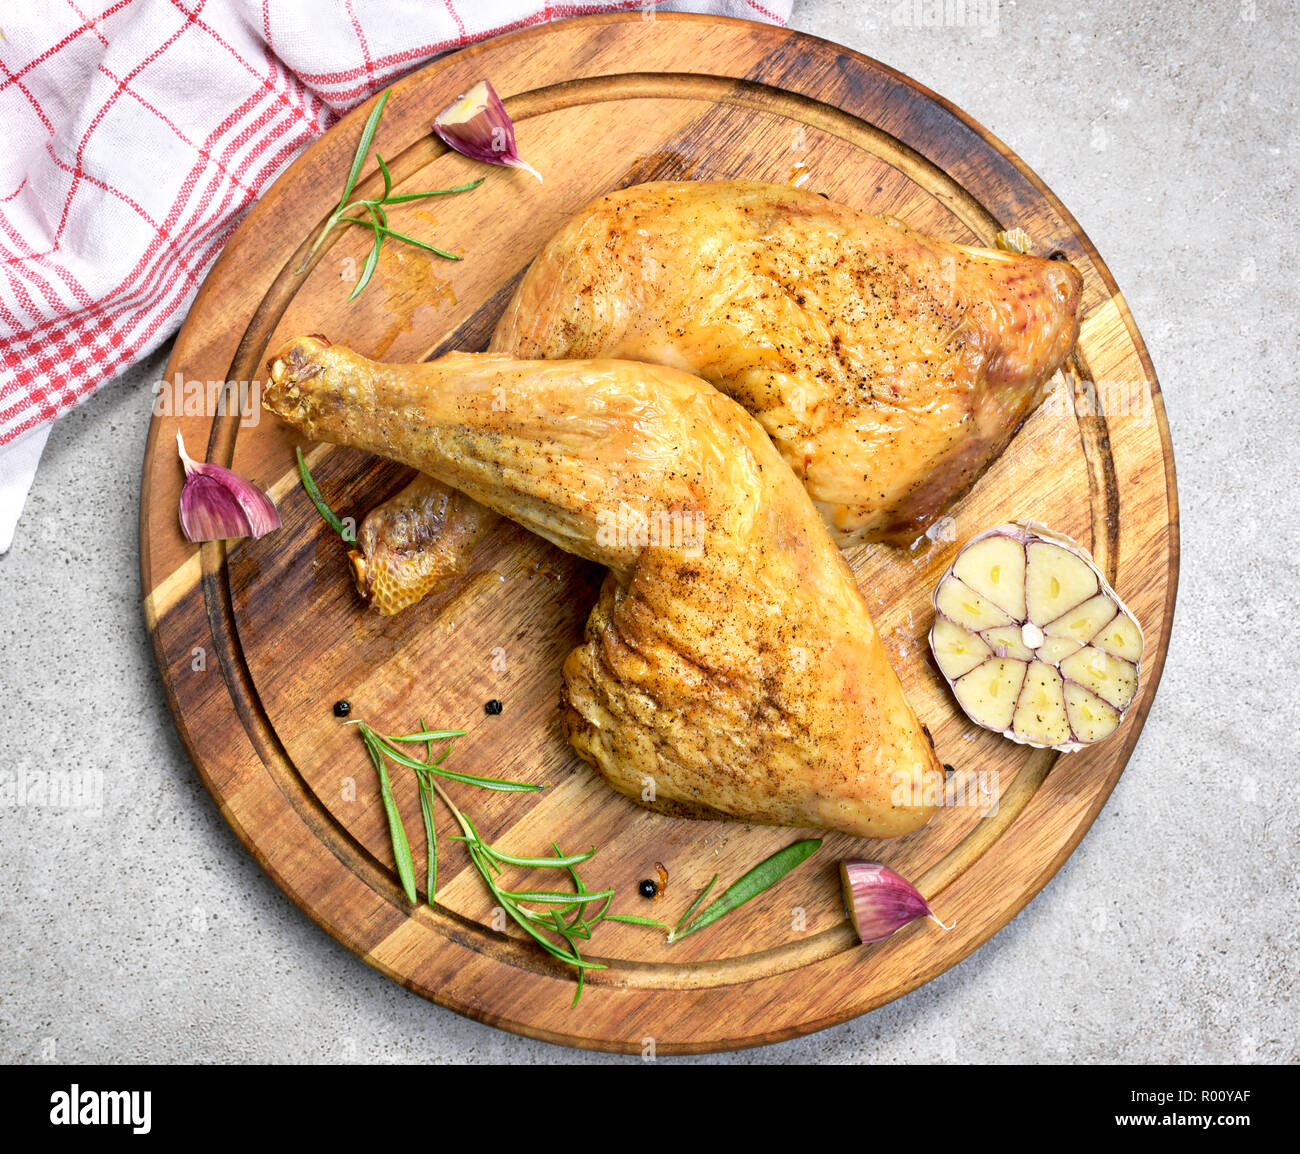 Delicious roast chicken leg or chicken drumsticks on a wooden cutting board. High angle view and fresh rosemary and garlic. Closeup shot, top view. Stock Photo